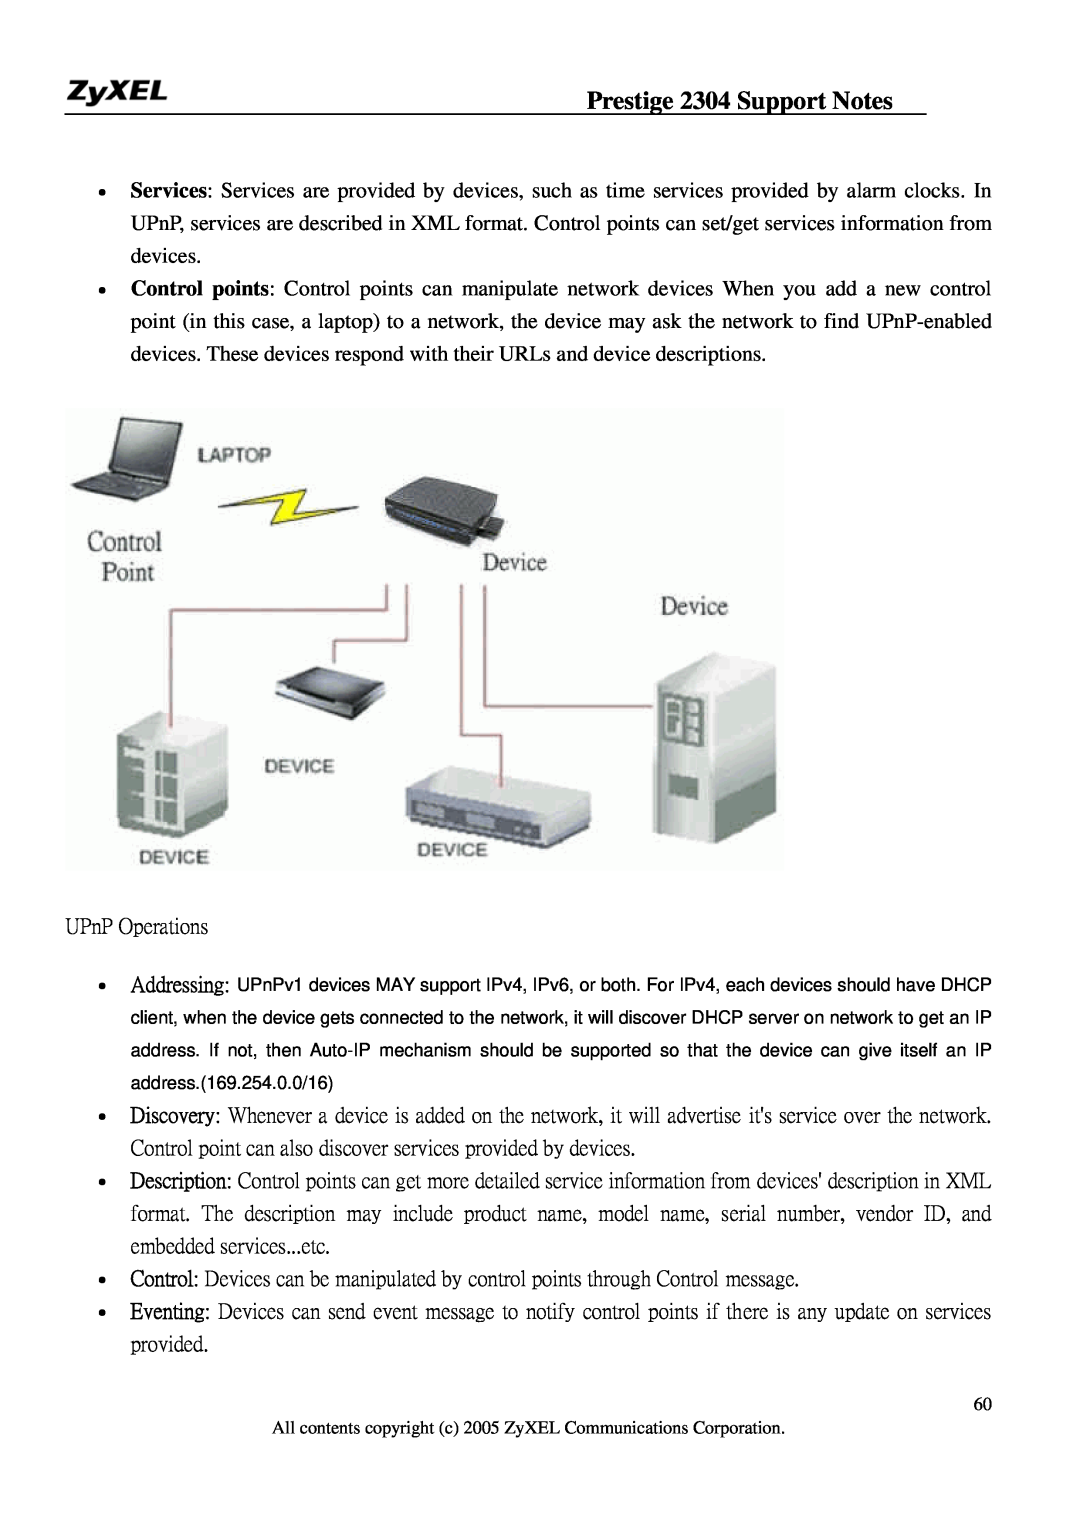 ZyXEL Communications 2304R-P1 manual Prestige 2304 Support Notes, UPnP Operations 